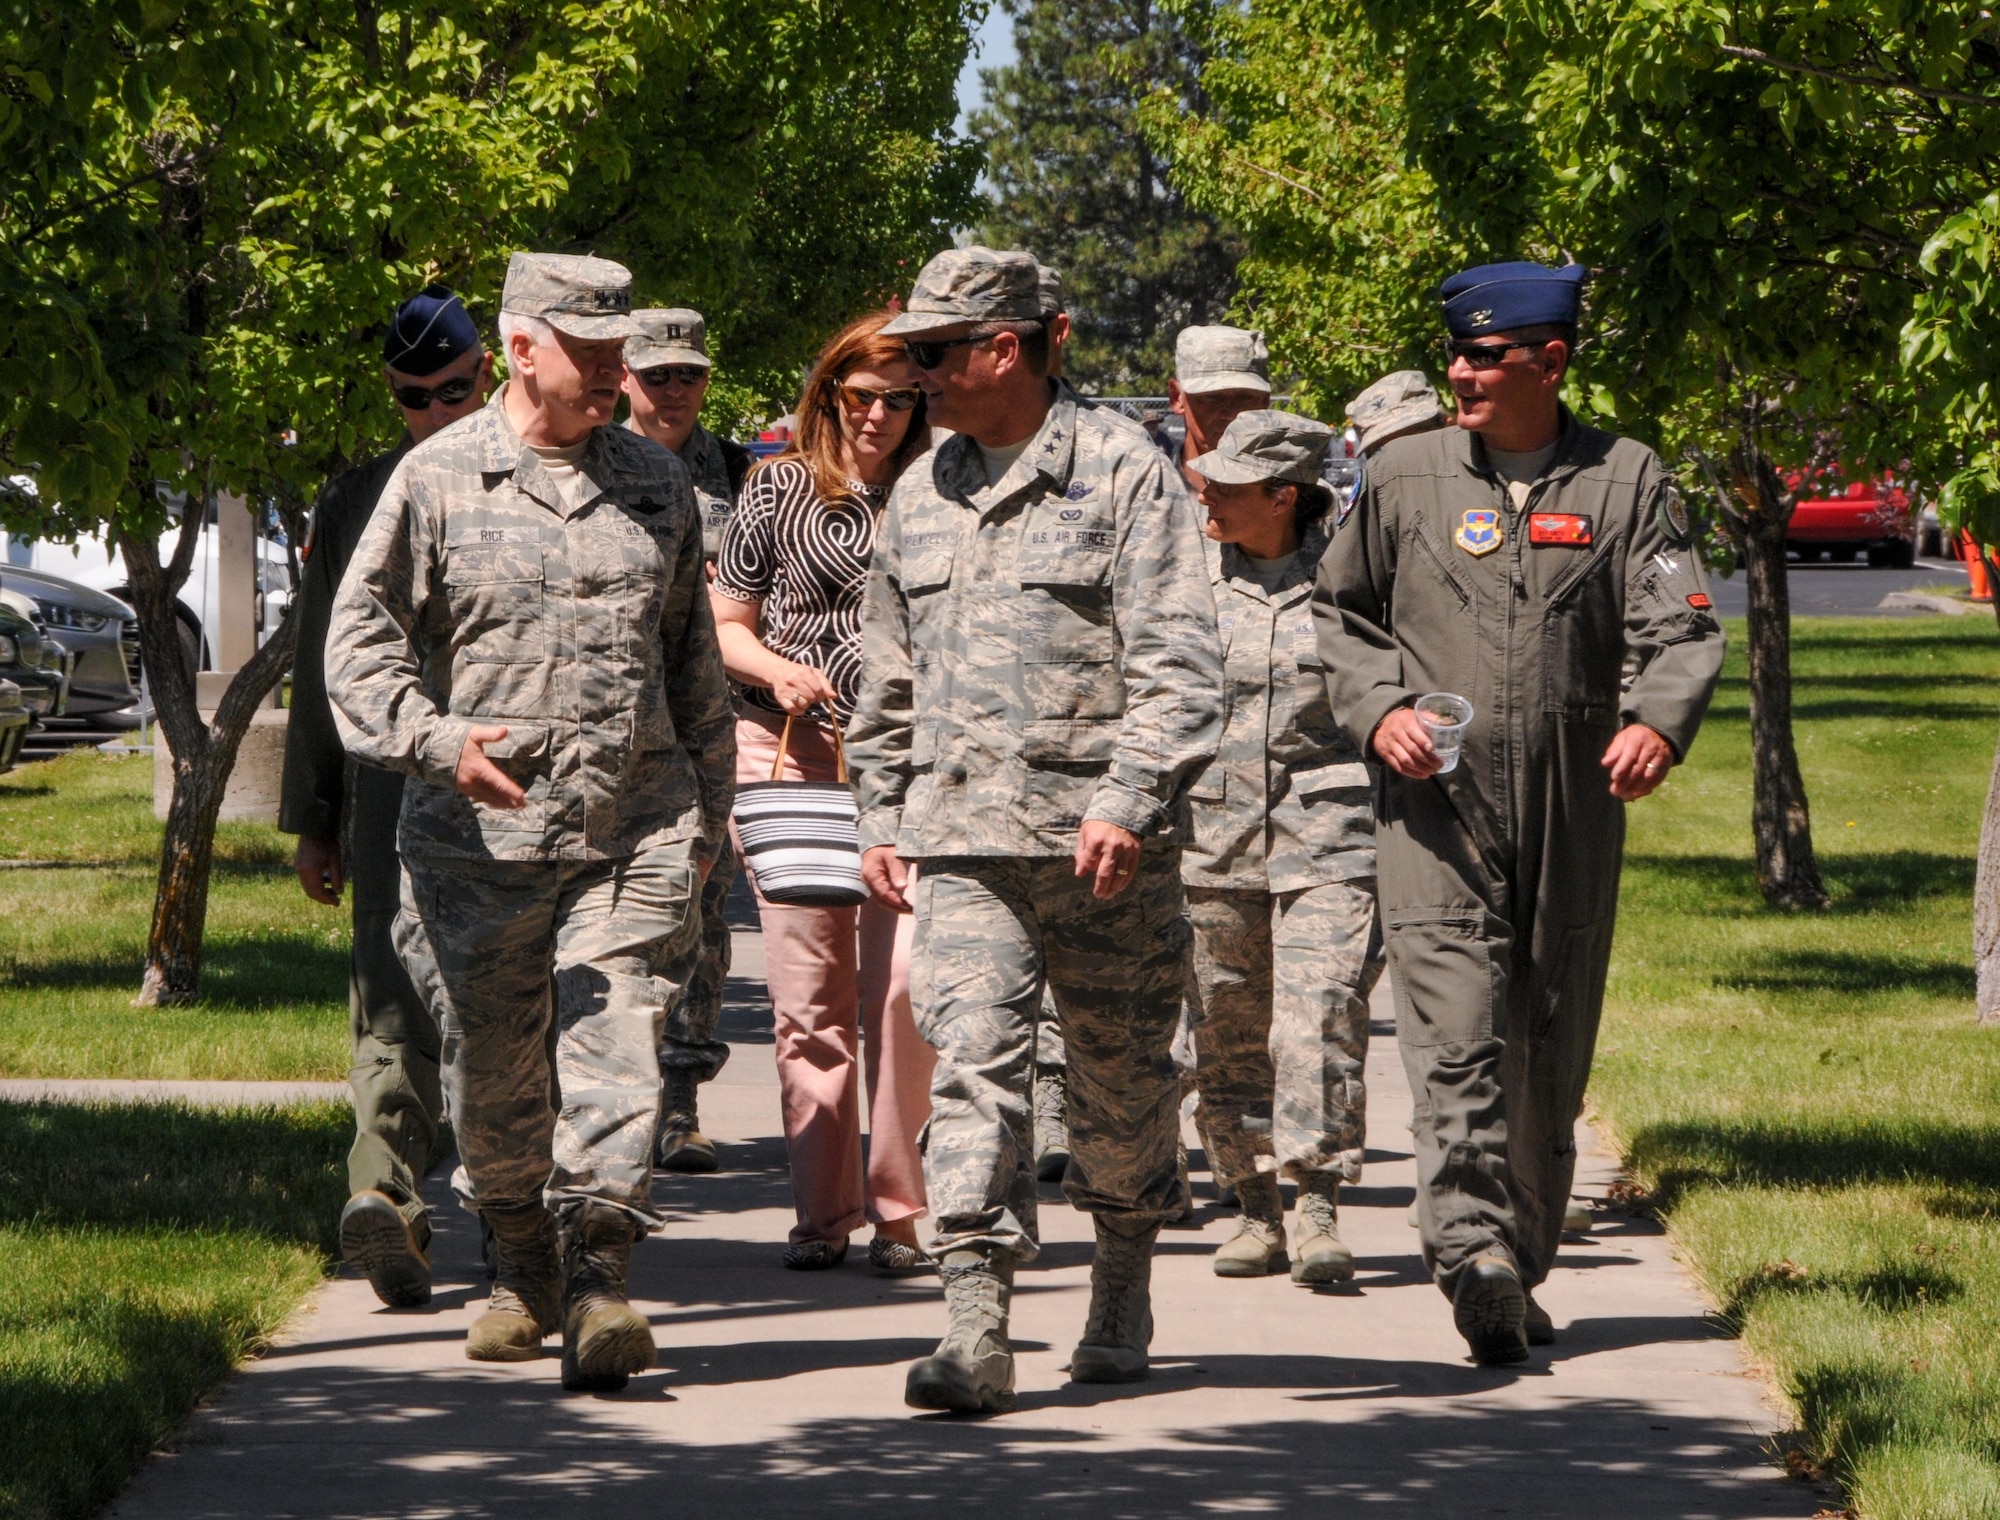 U.S. Air Force Lt. Gen. Scott Rice, Director of the Air National Guard, Maj. Gen. Michael Stencel, Adjutant General, Oregon, Col. Jeffrey Smith, Commander 173rd Fighter Wing, and distinguished visitors walk towards the flight line during Sentry Eagle, July 22, 2017, at Kingsley Field in Klamath Falls, Oregon. The Sentry Eagle exercise was conducted simultaneously with an open house event open to the public. (U.S. Air National Guard photo by Staff Sgt. Penny Snoozy)